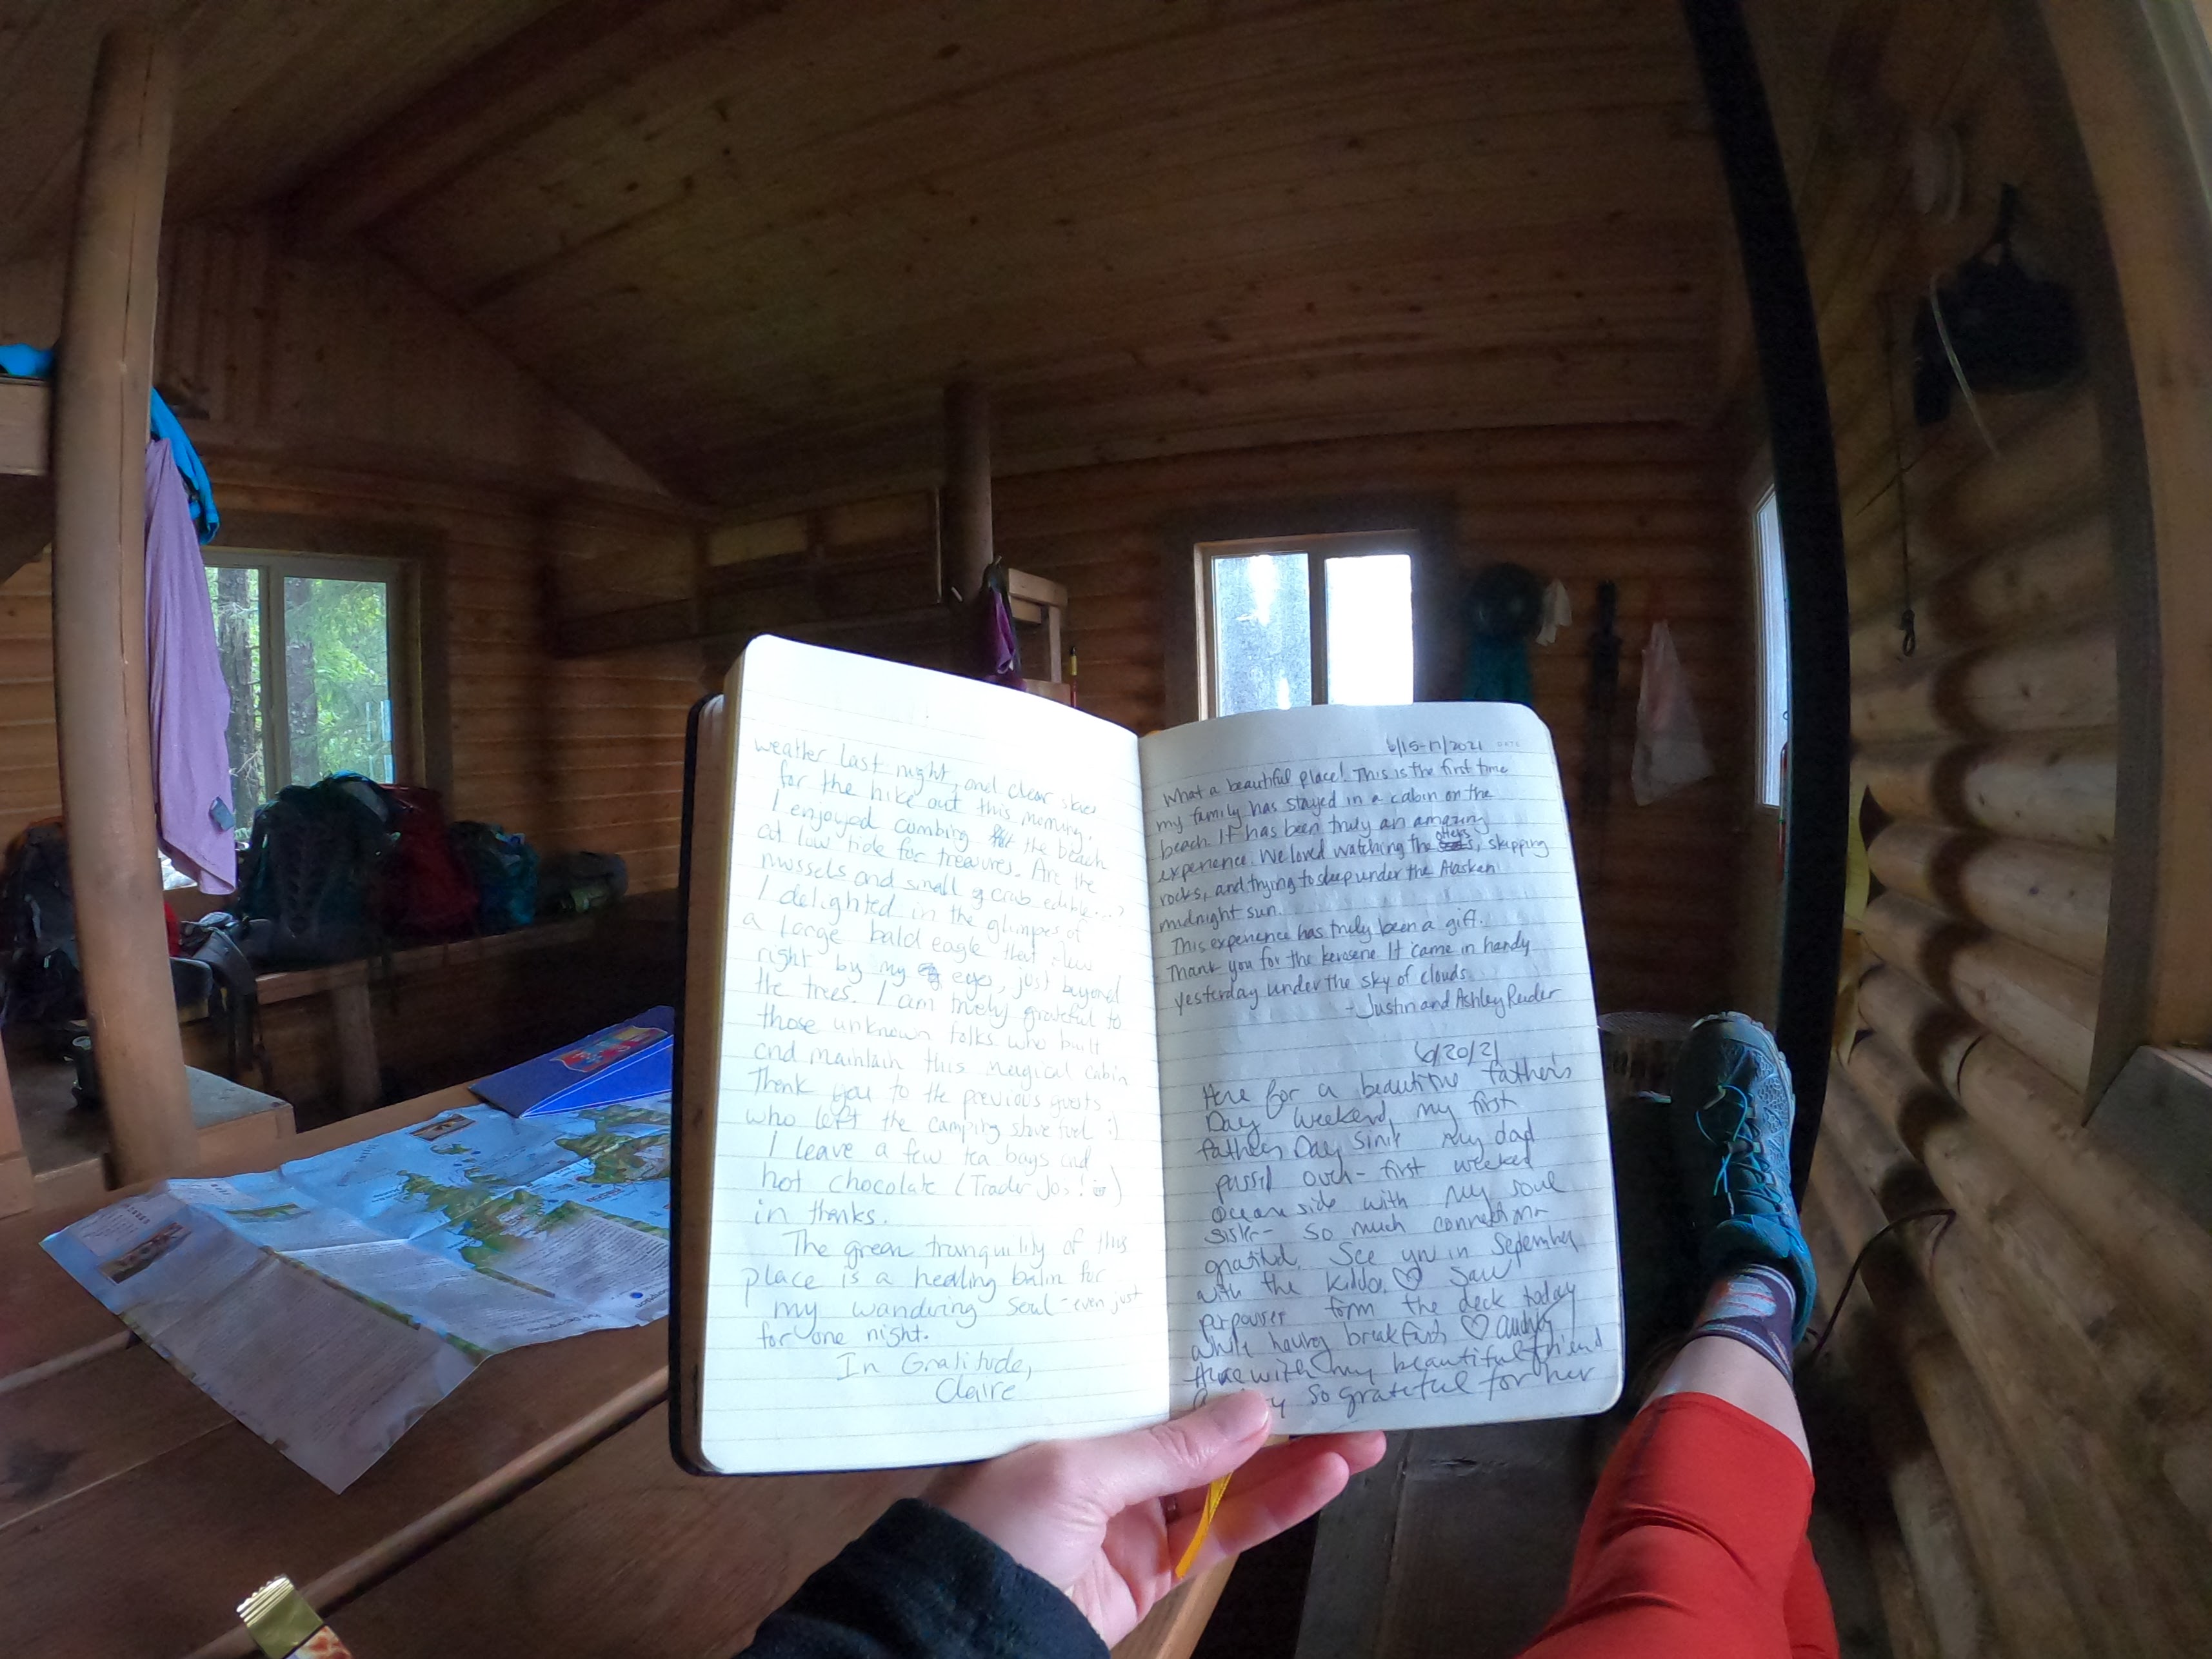 Reading the Cabin Journal